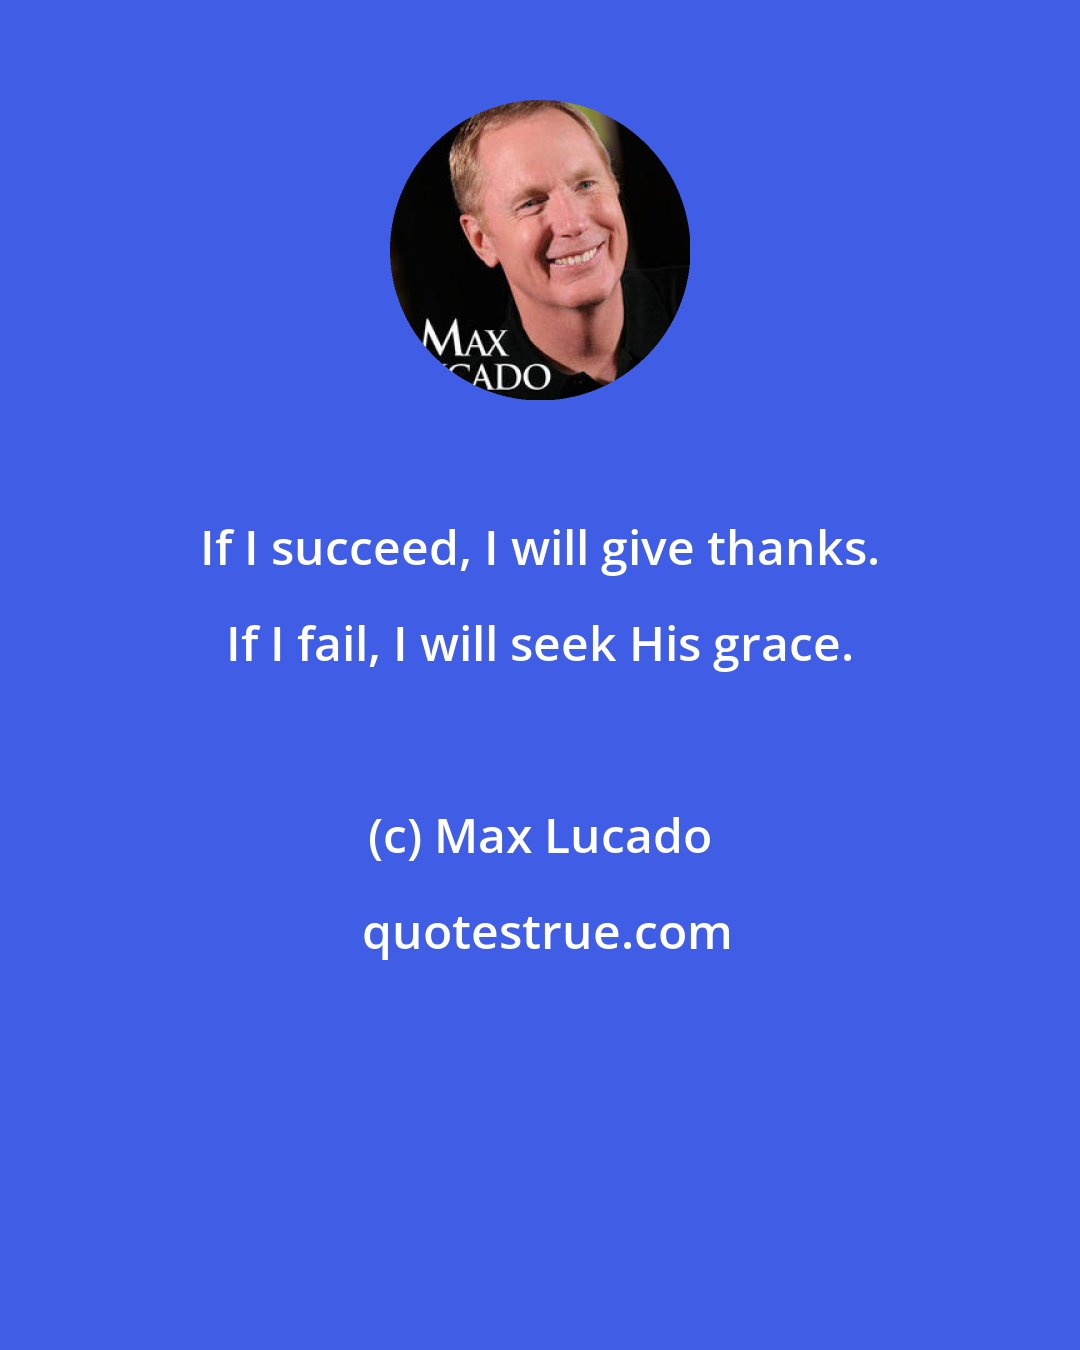 Max Lucado: If I succeed, I will give thanks. If I fail, I will seek His grace.